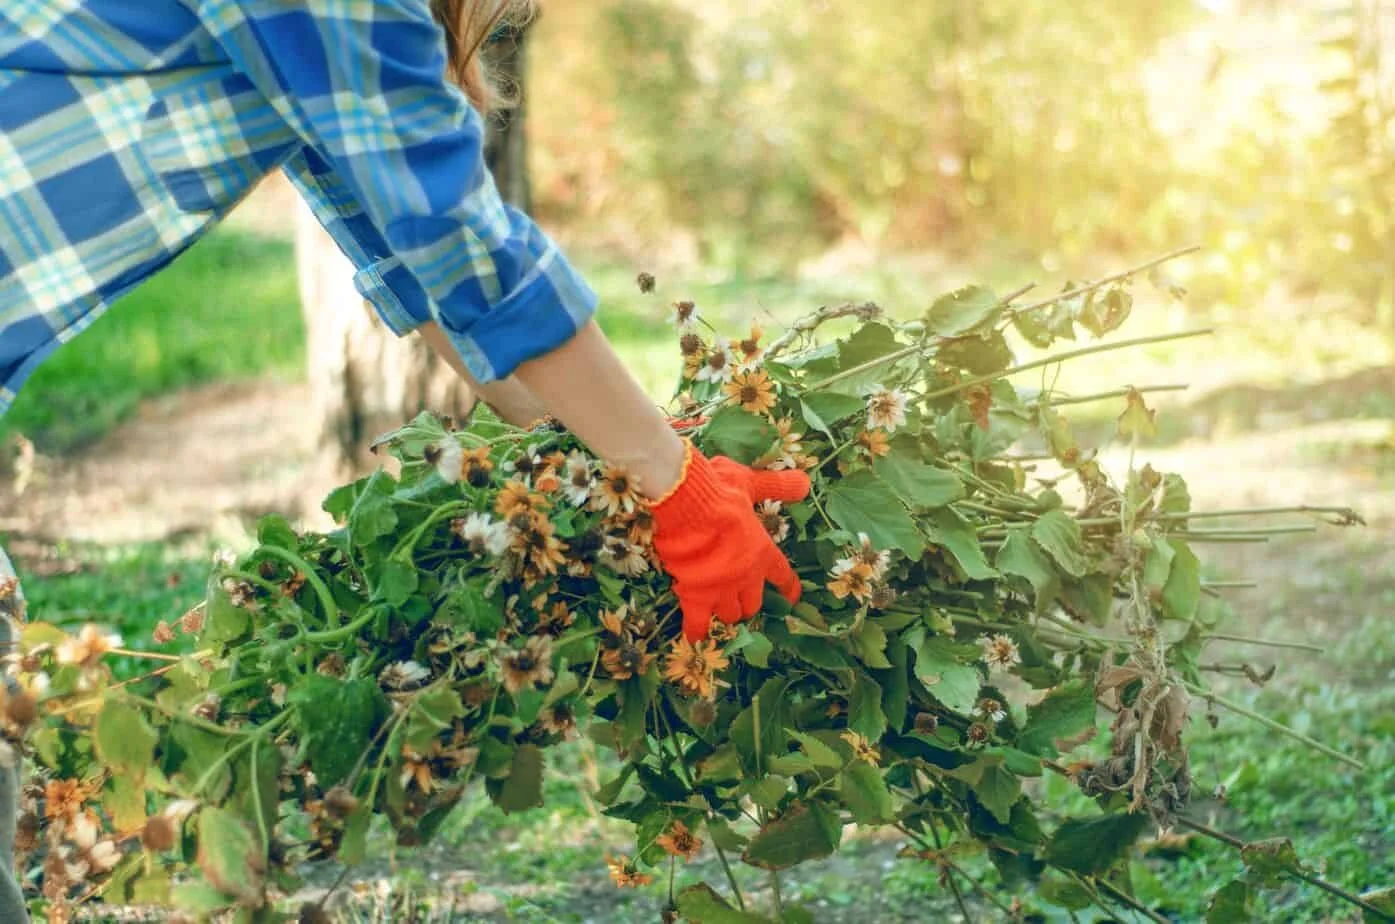 Women with landscaping gloves cleaning up bush clippings